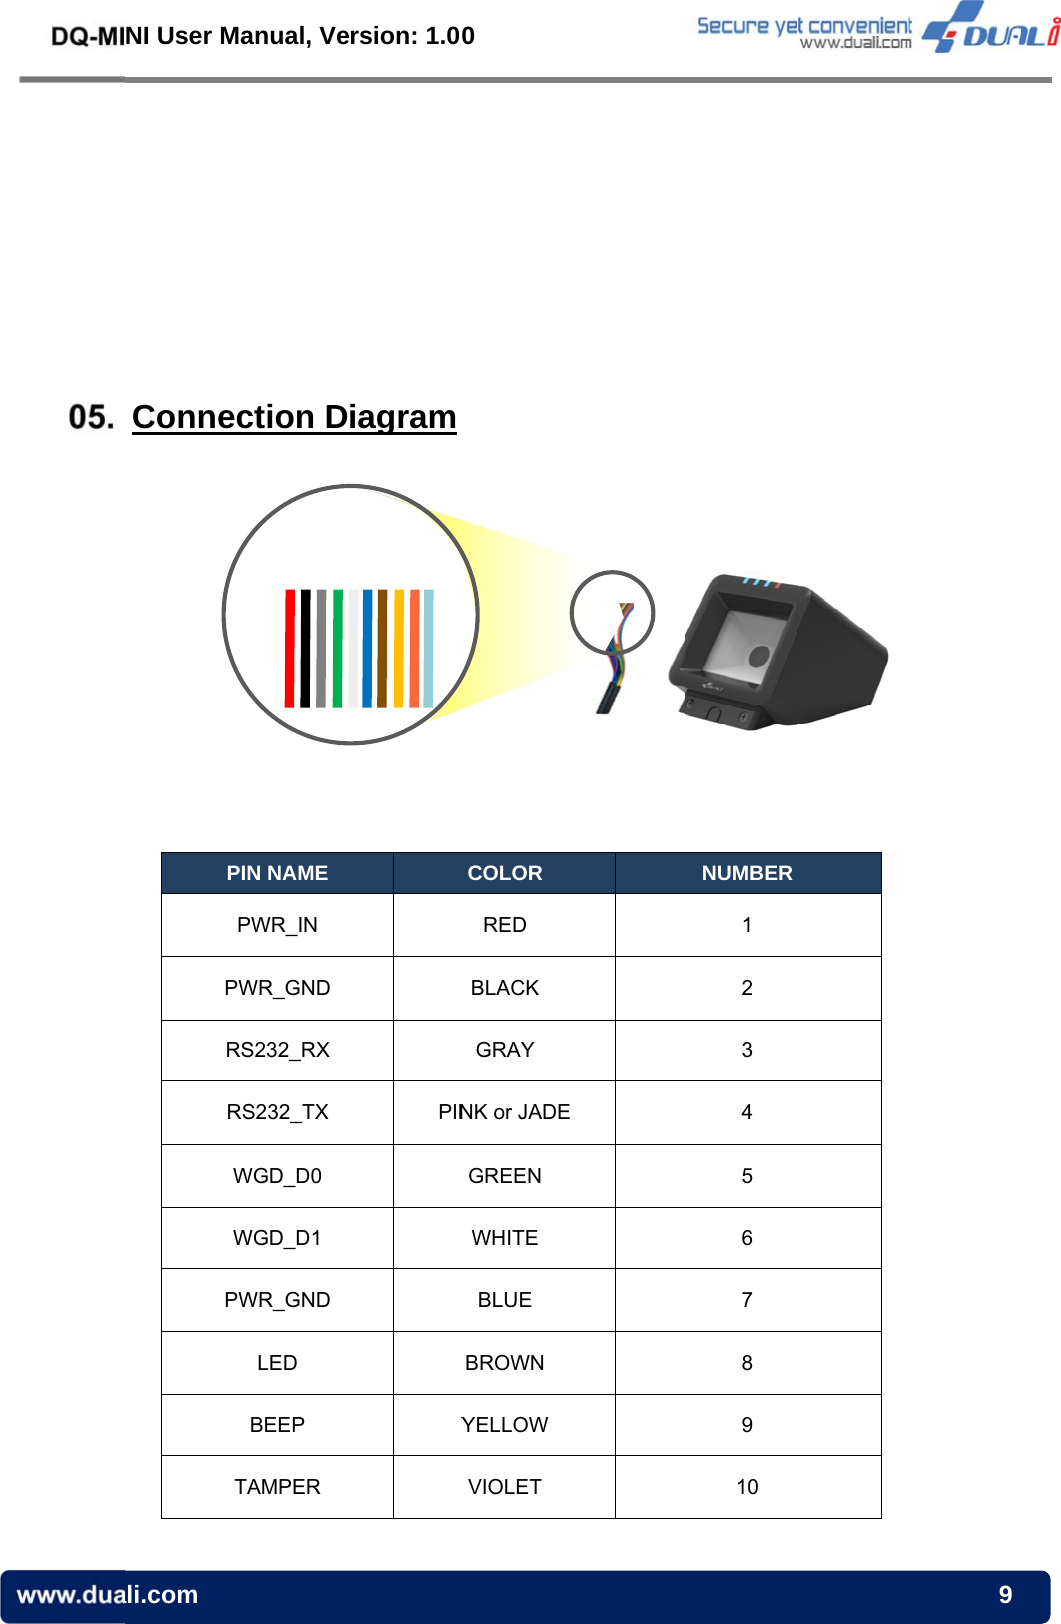 NI User Mali.com    ConnePPRRWWPTManual, Ve         ction DPIN NAME PWR_IN PWR_GND RS232_RX RS232_TX WGD_D0 WGD_D1 PWR_GND LED BEEP TAMPER rsion: 1.0         iagramPINY0           COLOR RED BLACK GRAY NK or JADEGREEN WHITE BLUE BROWN YELLOW VIOLET                   NUMBER 1 2 3 4 5 6 7 8 9 10                 9